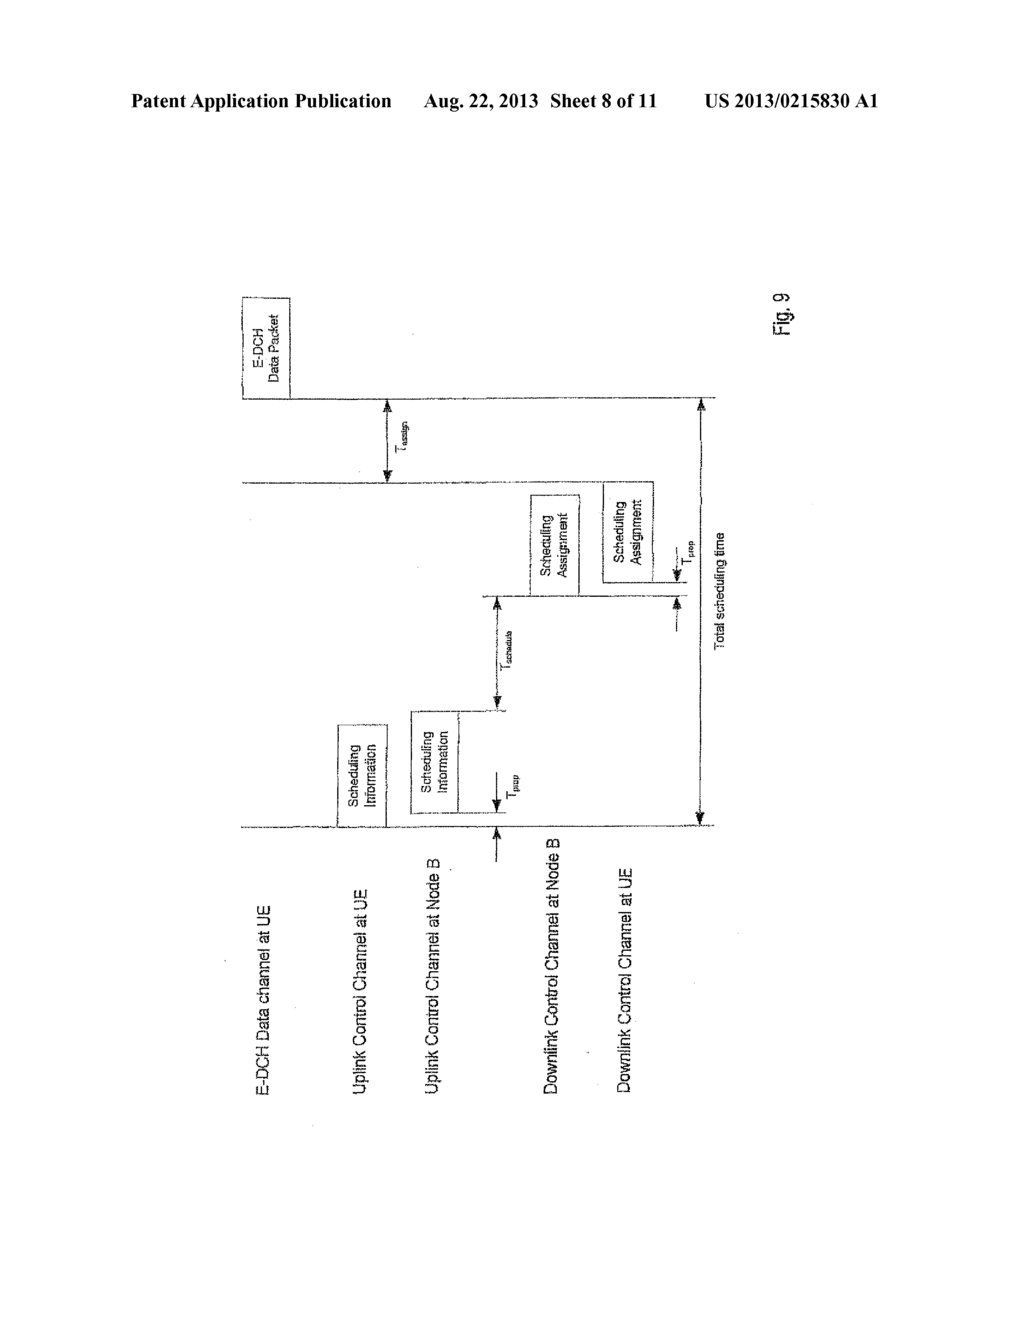 SYNCHRONOUS HYBRID AUTOMATIC REPEAT REQUEST (HARQ) PROTOCOL EMPLOYING A     FIRST INFORMATION ELEMENT INDICATING WHETHER TO PERFORM RETRANSMISSION OF     AN UPLINK DATA PACKET AND A SECOND INFORMATION ELEMENT INDICATES     MODULATION AND CODING SCHEME (MCS) FOR THE RETRANSMISSION - diagram, schematic, and image 09